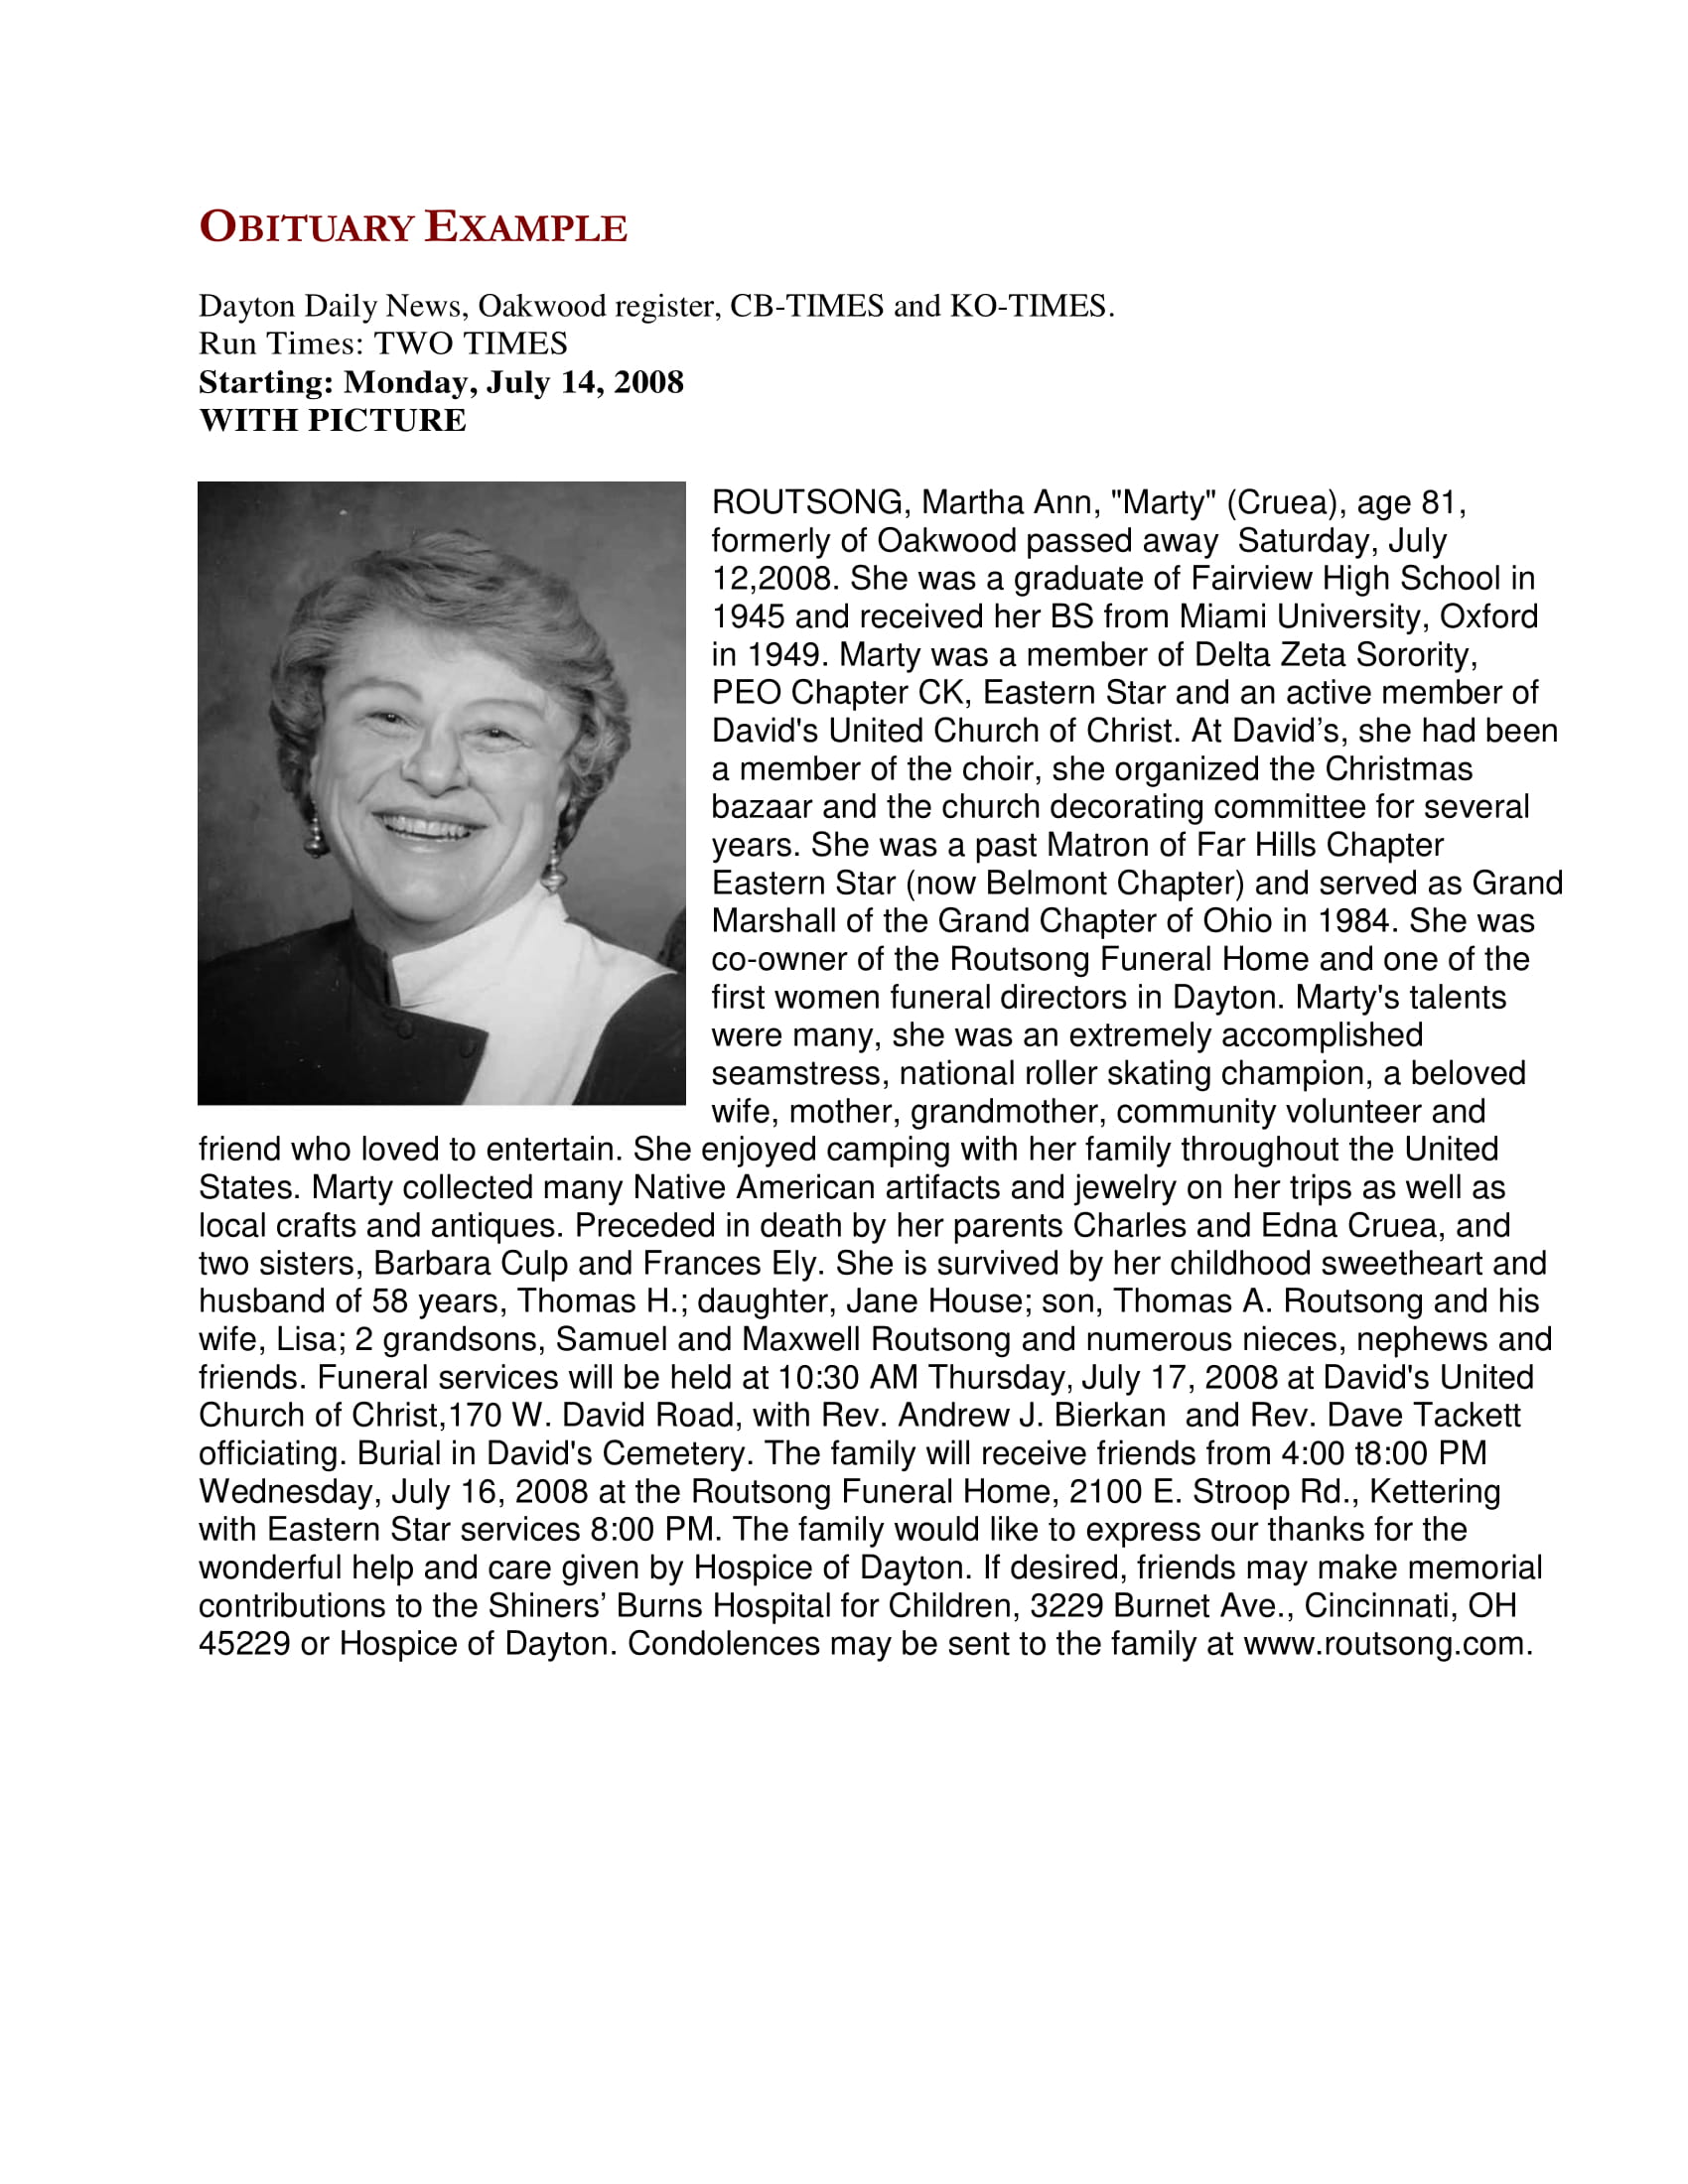 How to Write a Newspaper Obituary (With Examples)  Examples